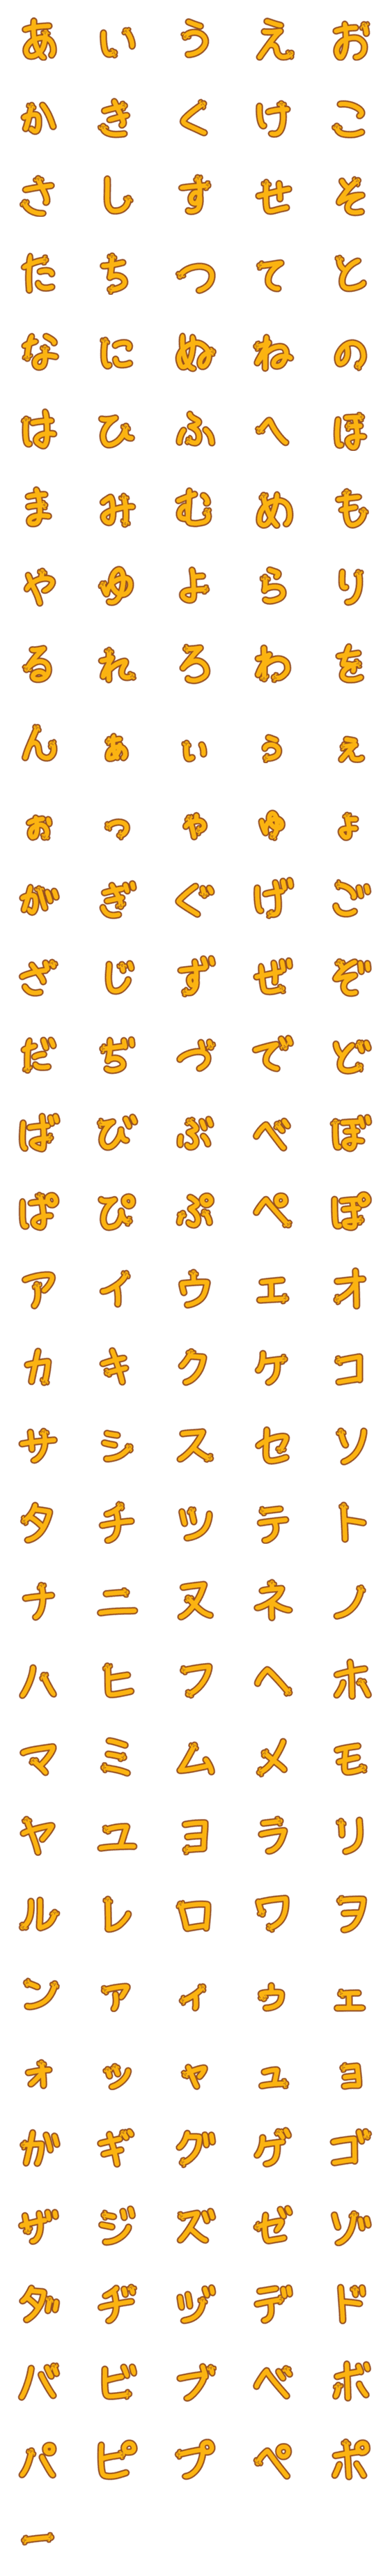 [LINE絵文字]土器文字の画像一覧